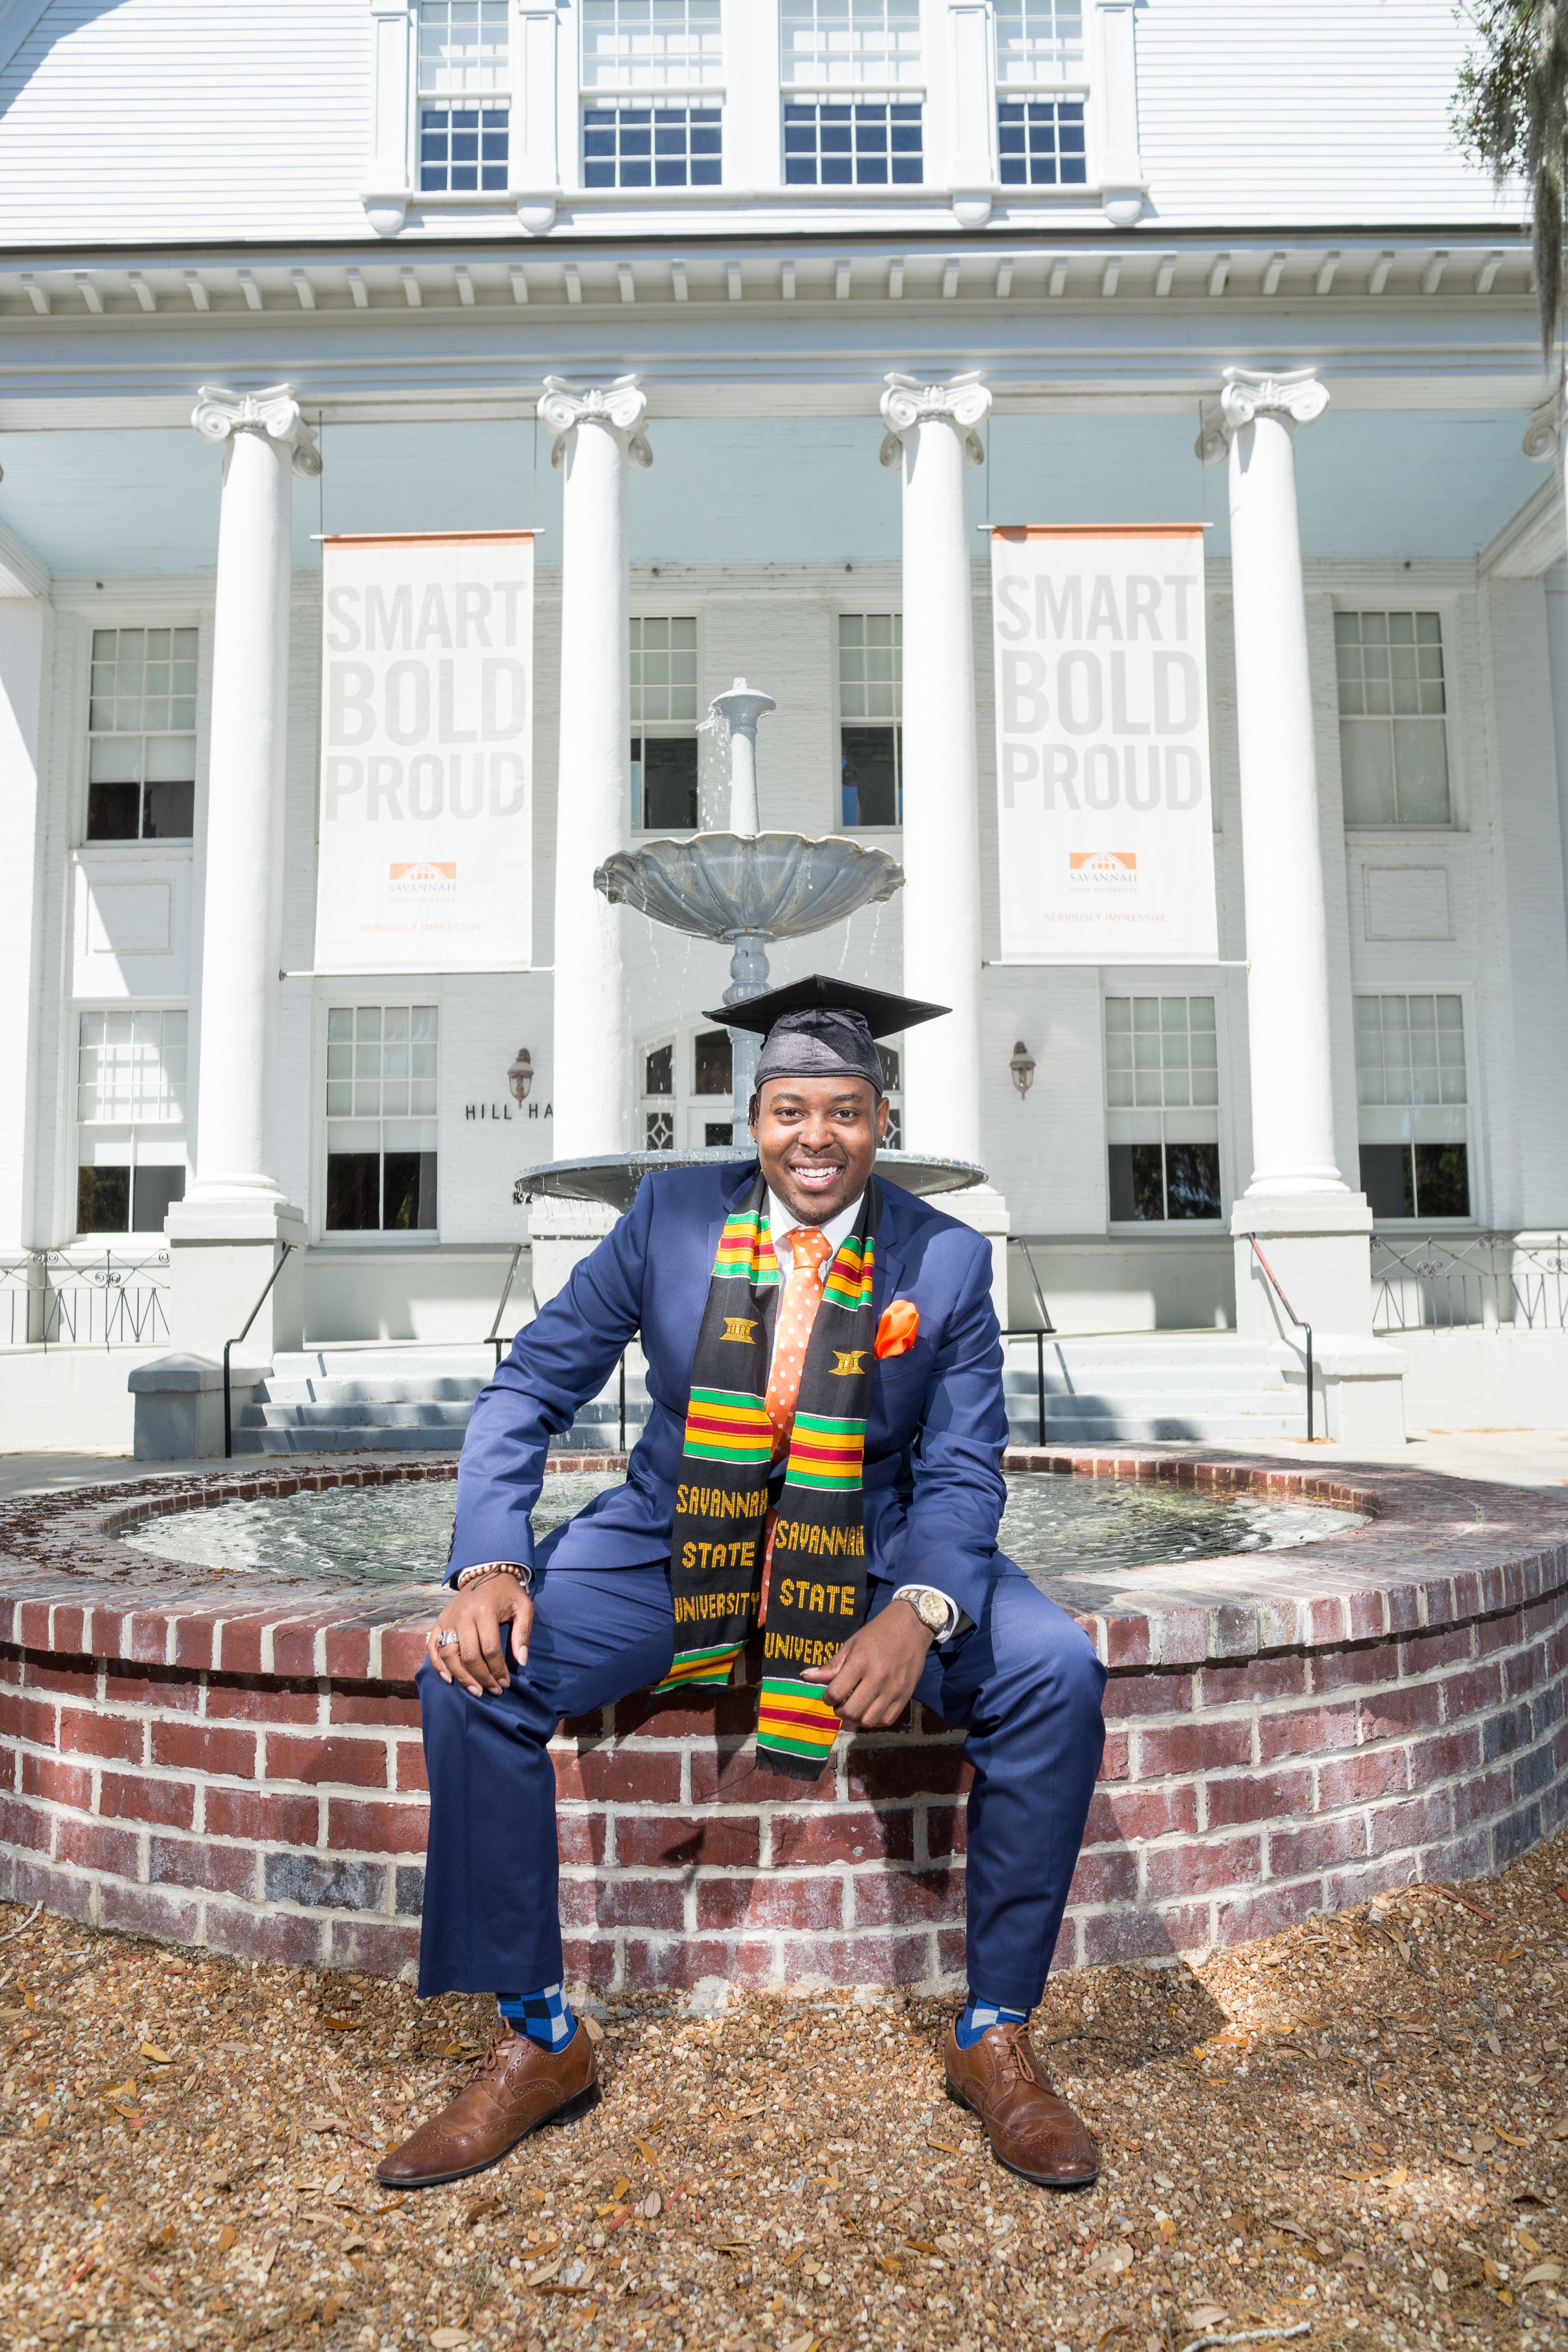 20 HBCU Graduates On Why They Attended Historically Black Schools